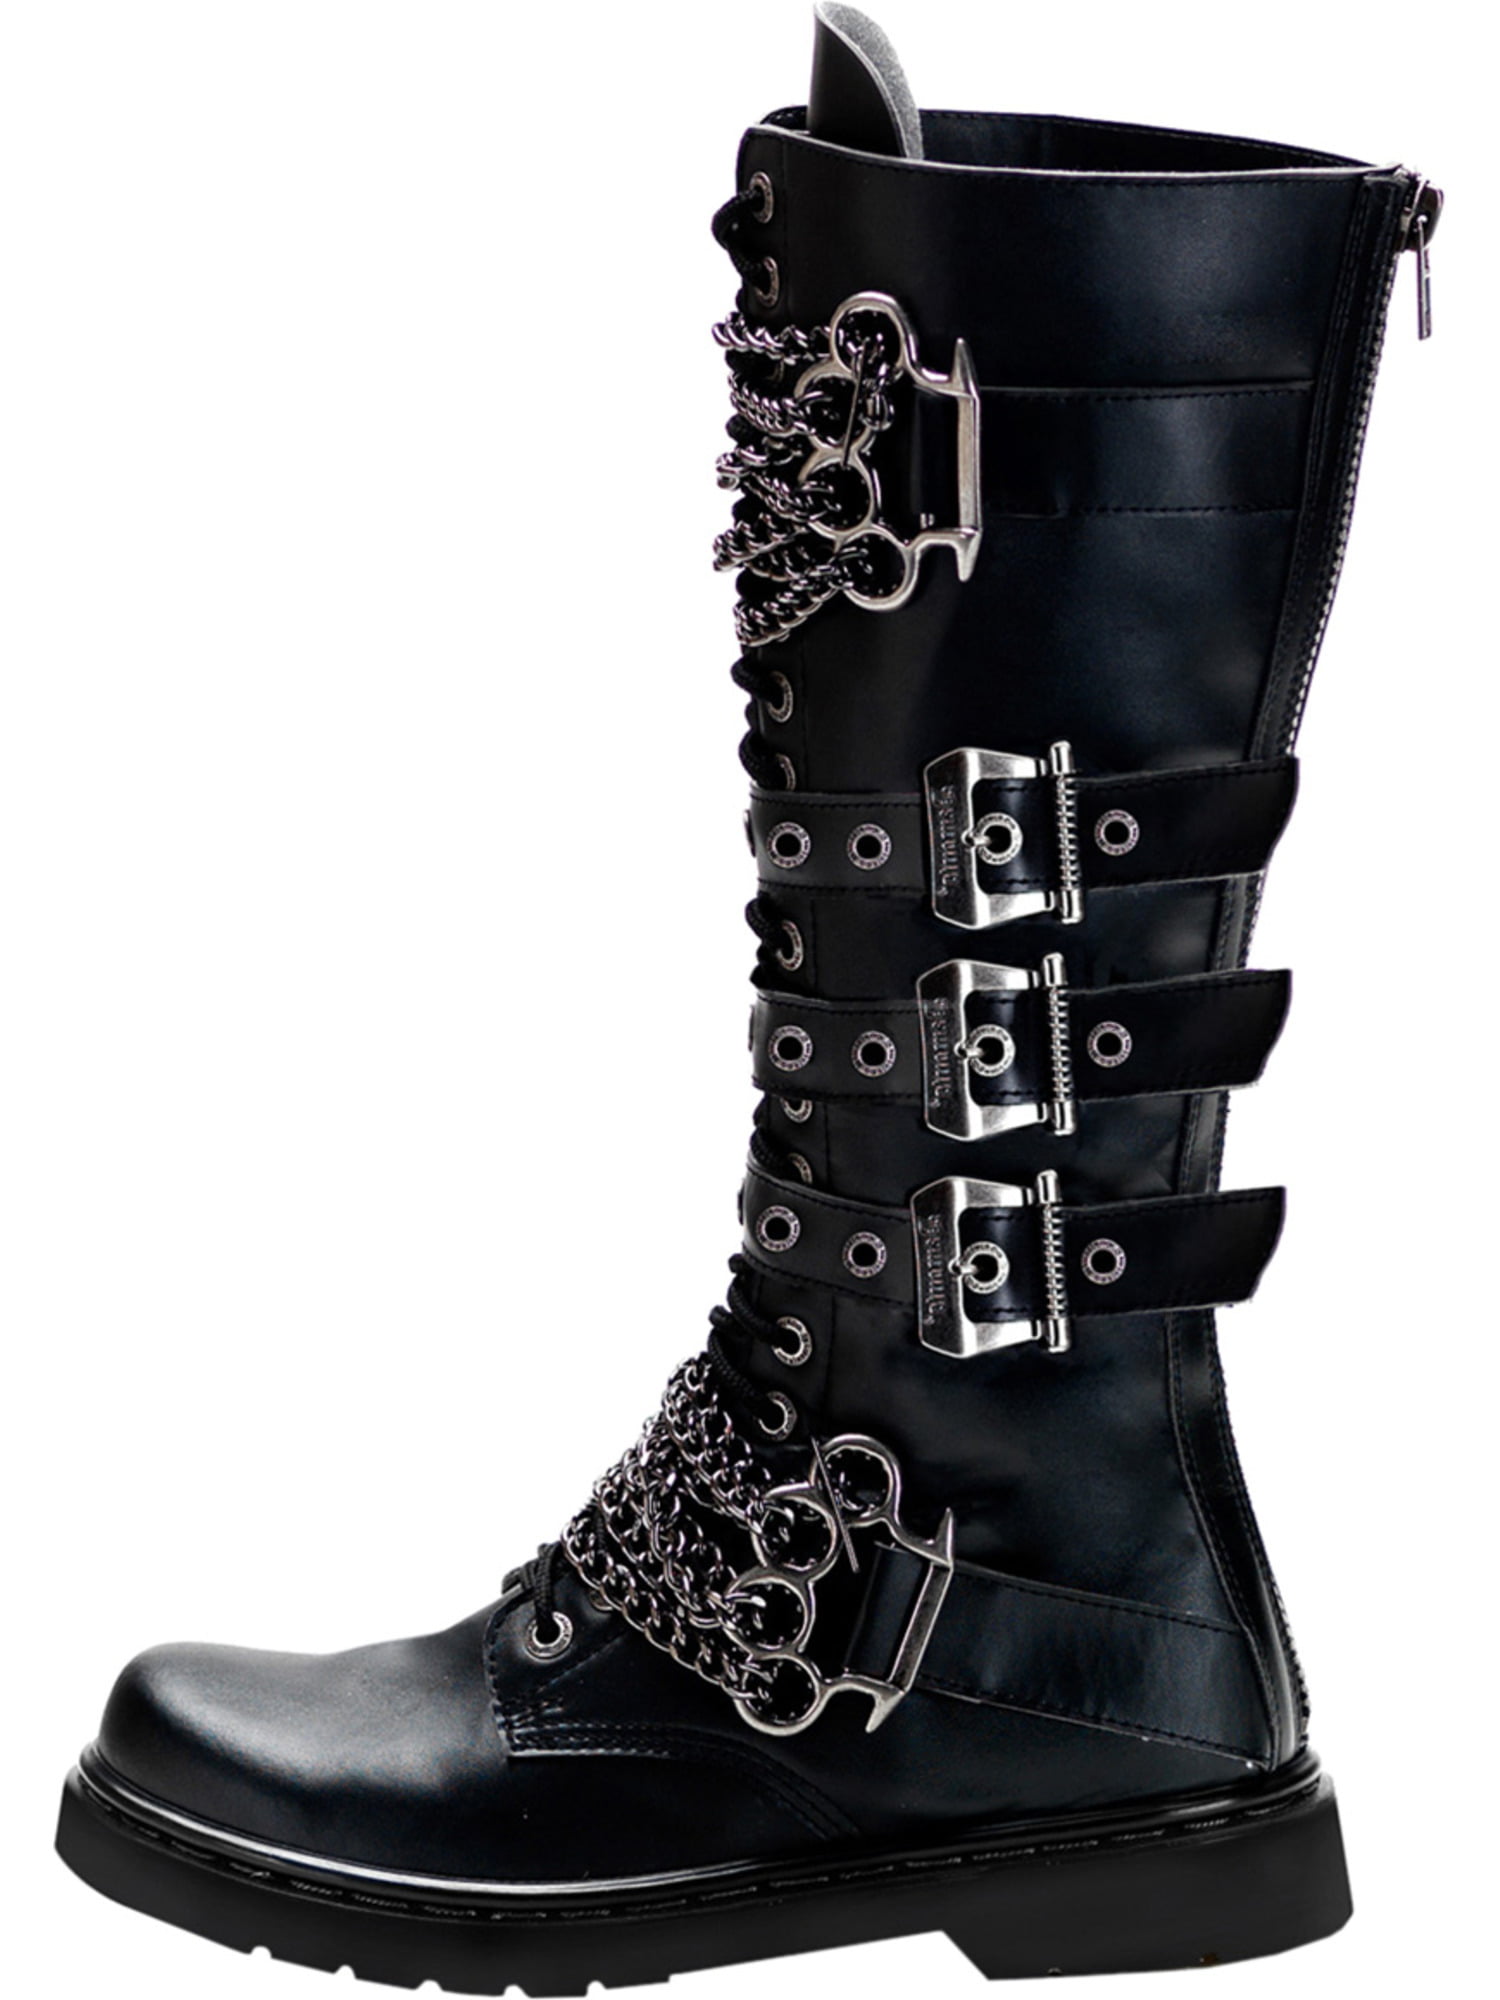 Amazing Mens Knee High Boots in the world Check it out now!